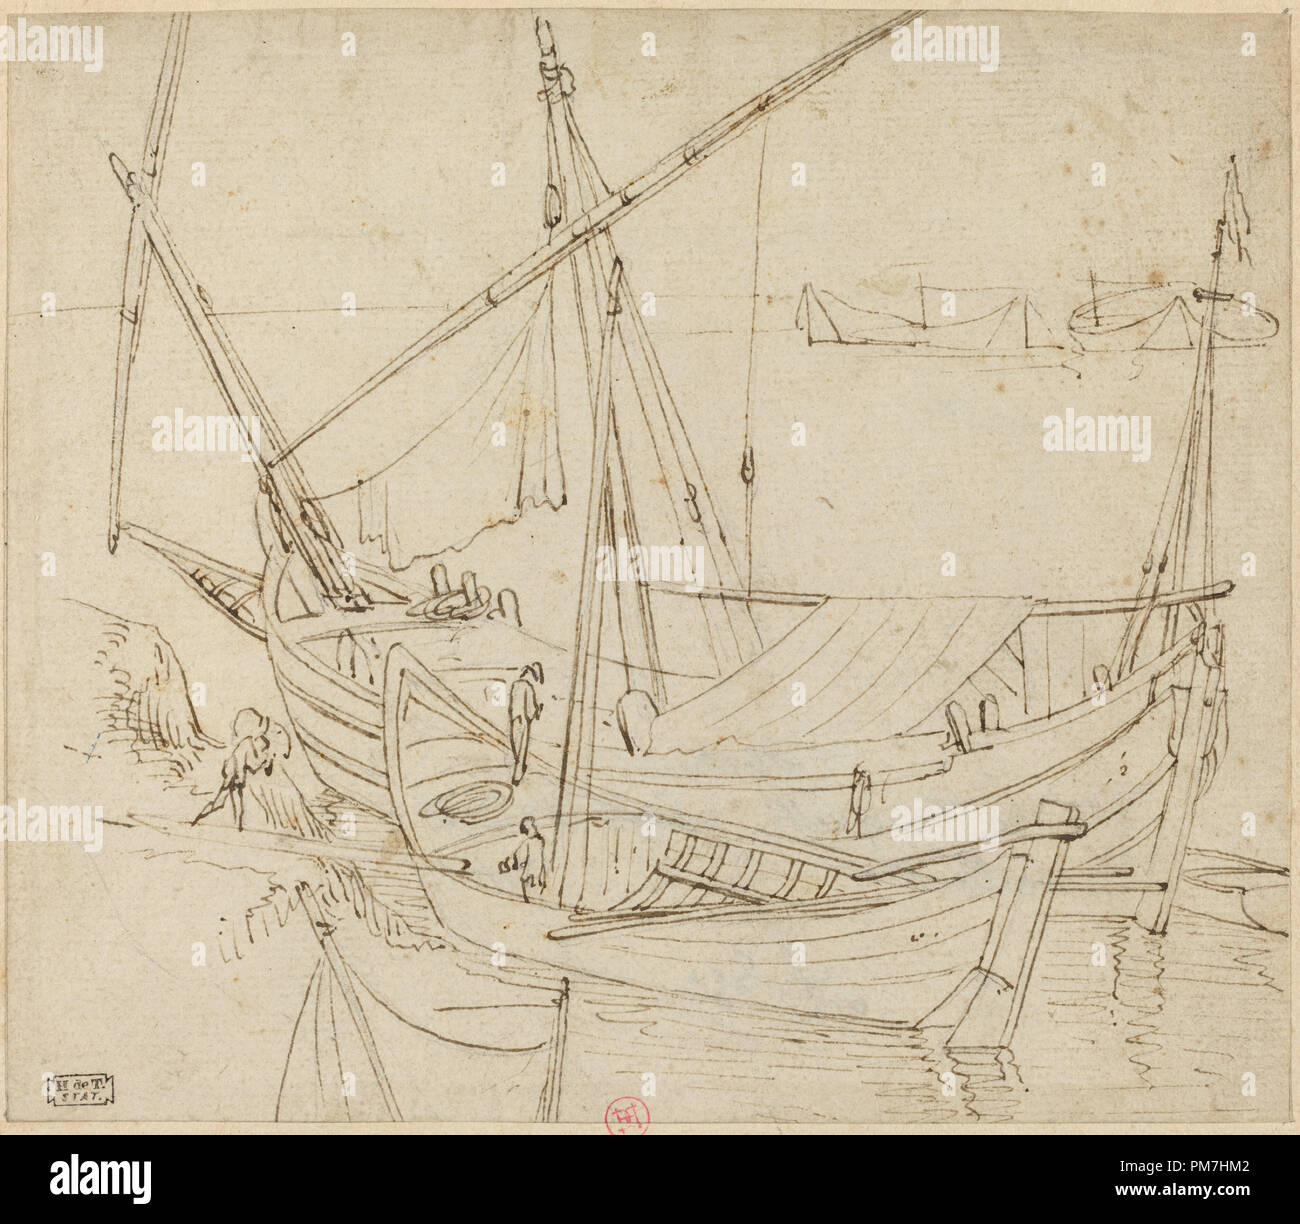 Boats. Dimensions: Overall (approximate): 15.4 x 17.7 cm (6 1/16 x 6 15/16 in.)  support: 21.8 x 20.5 cm (8 9/16 x 8 1/16 in.). Medium: pen an brown ink on laid paper. Museum: National Gallery of Art, Washington DC. Author: Follower of Agostino Tassi. Stock Photo